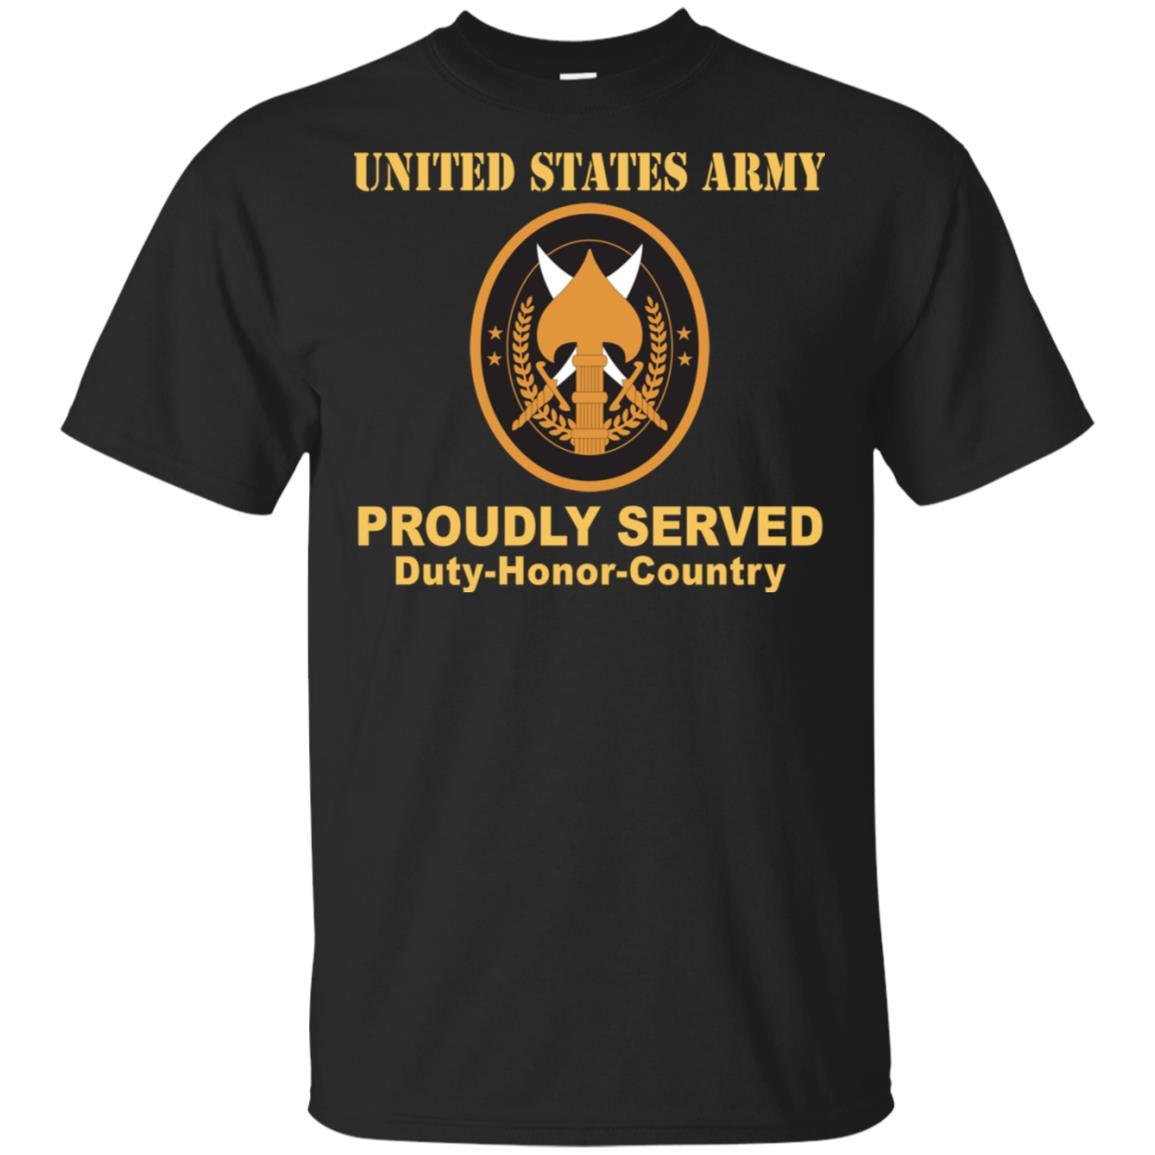 US ARMY SPECIAL OPERATIONS JOINT TASK FORCE OPERATION INHERENT RESOLVE CSIB- Proudly Served T-Shirt On Front For Men-TShirt-Army-Veterans Nation